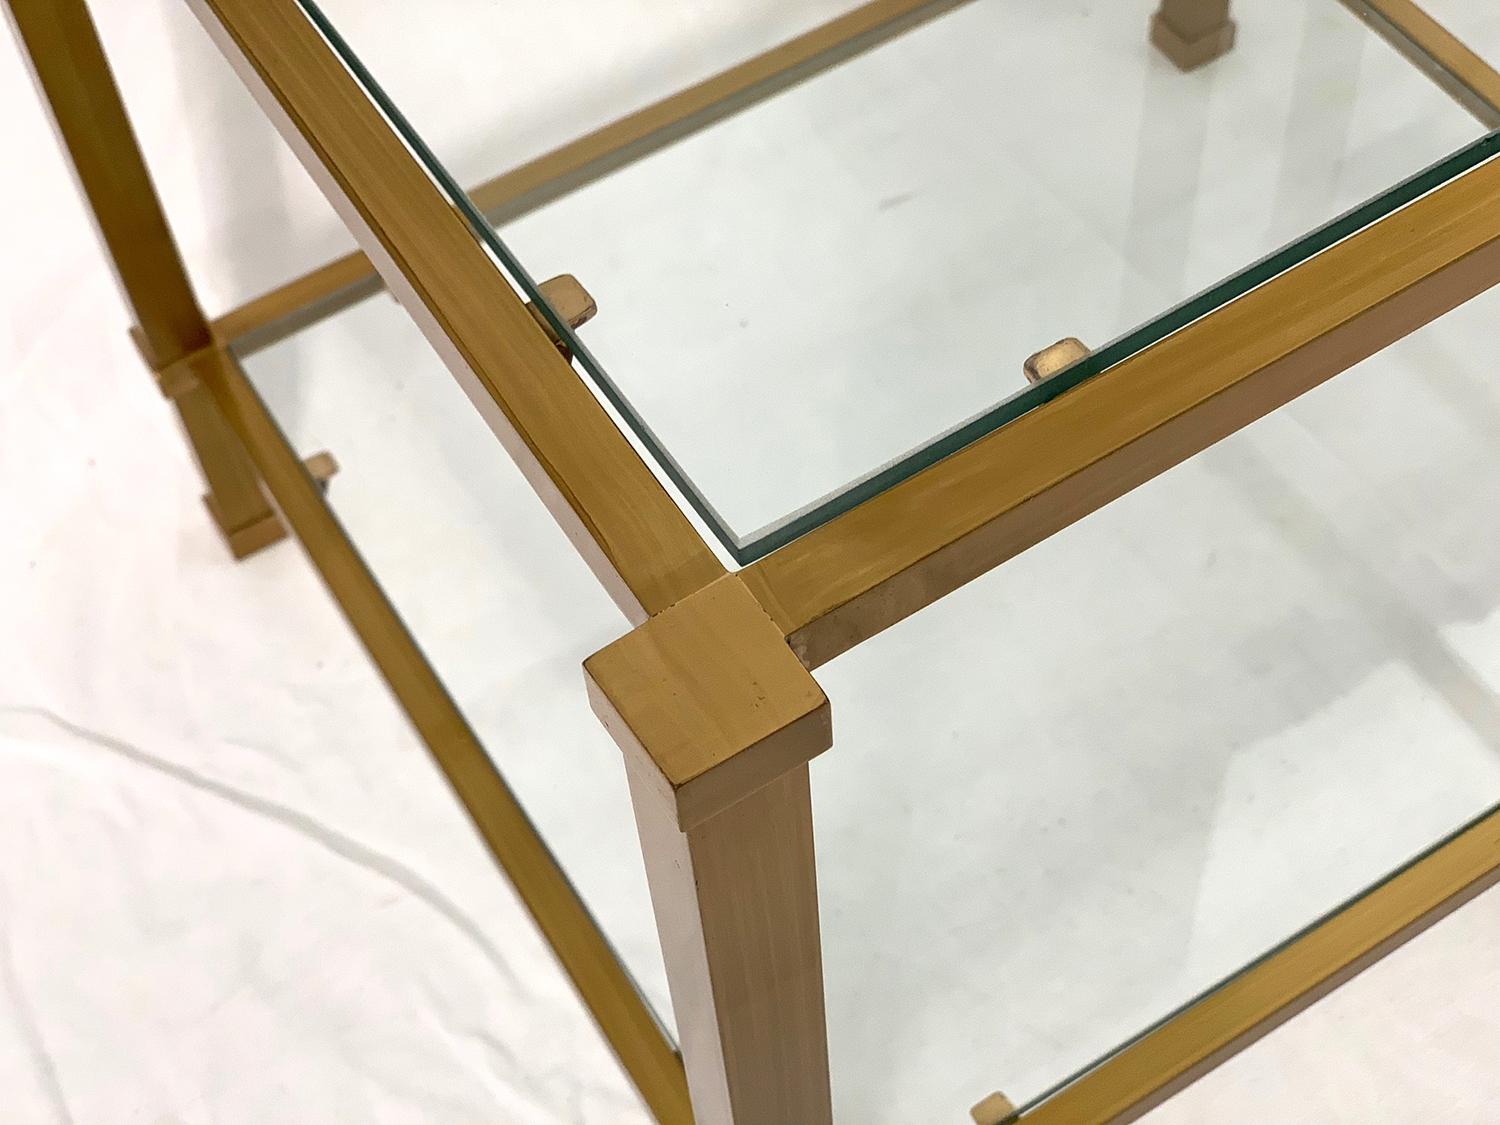 Late 20th Century Pair of Two-Tier Brass and Glass End Tables For Sale